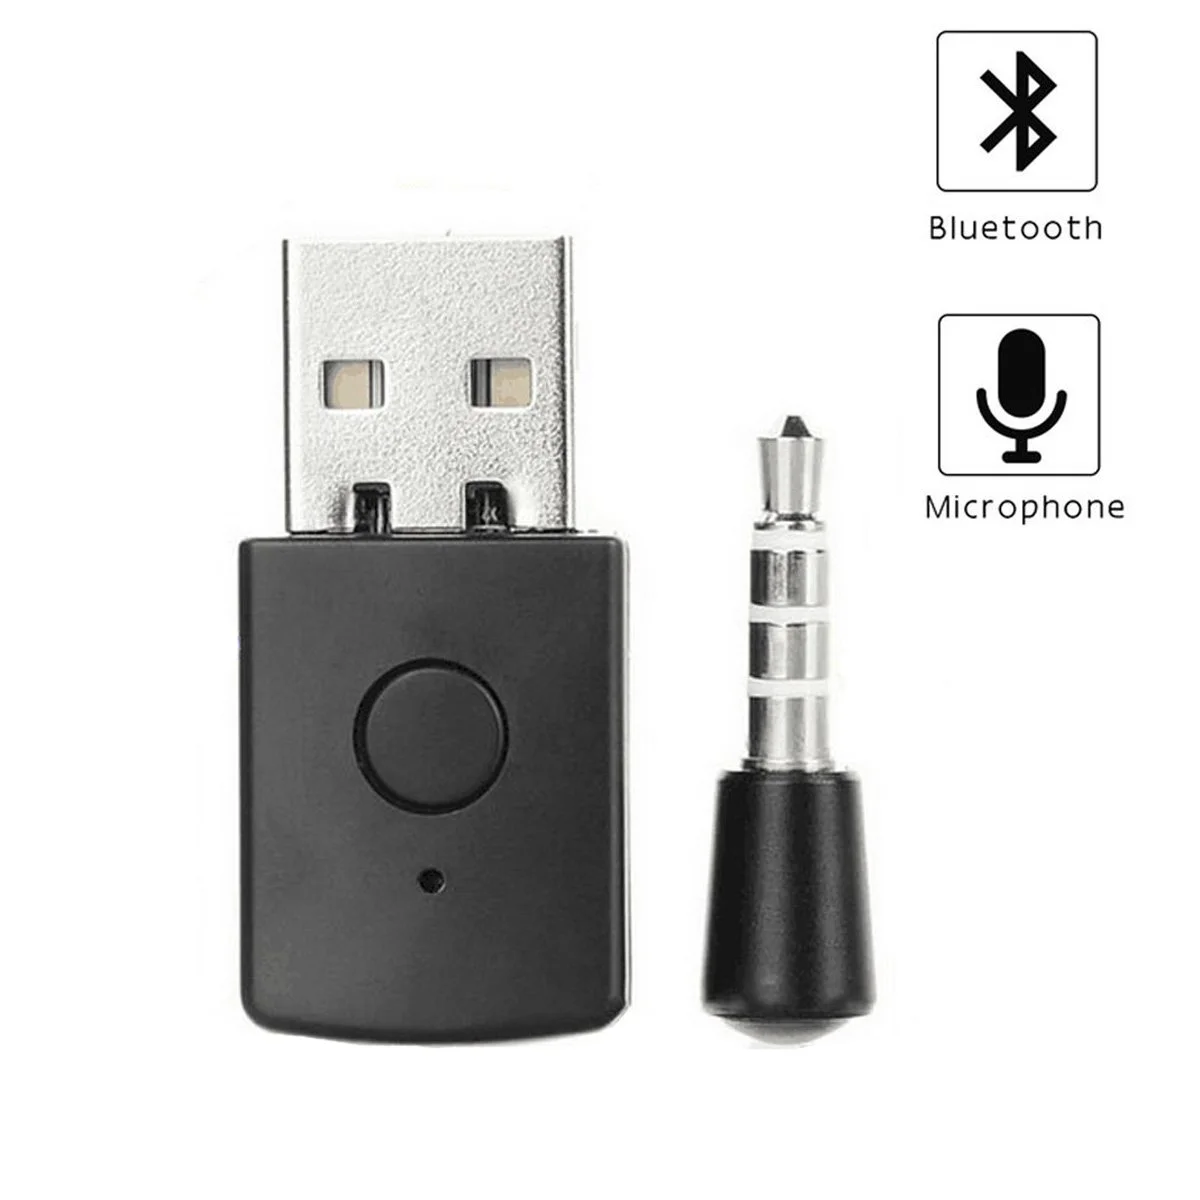 compromis Wizard Leonardoda Honcam Bluetooth Dongle Latest Version Usb Adapter Wireless Receiver For  Ps4 Headset - Buy Ps4 Usb Bluetooth Adapter,Bluetooth Adapter For Ps4,Ps4  Bluetooth Usb Dongle Product on Alibaba.com